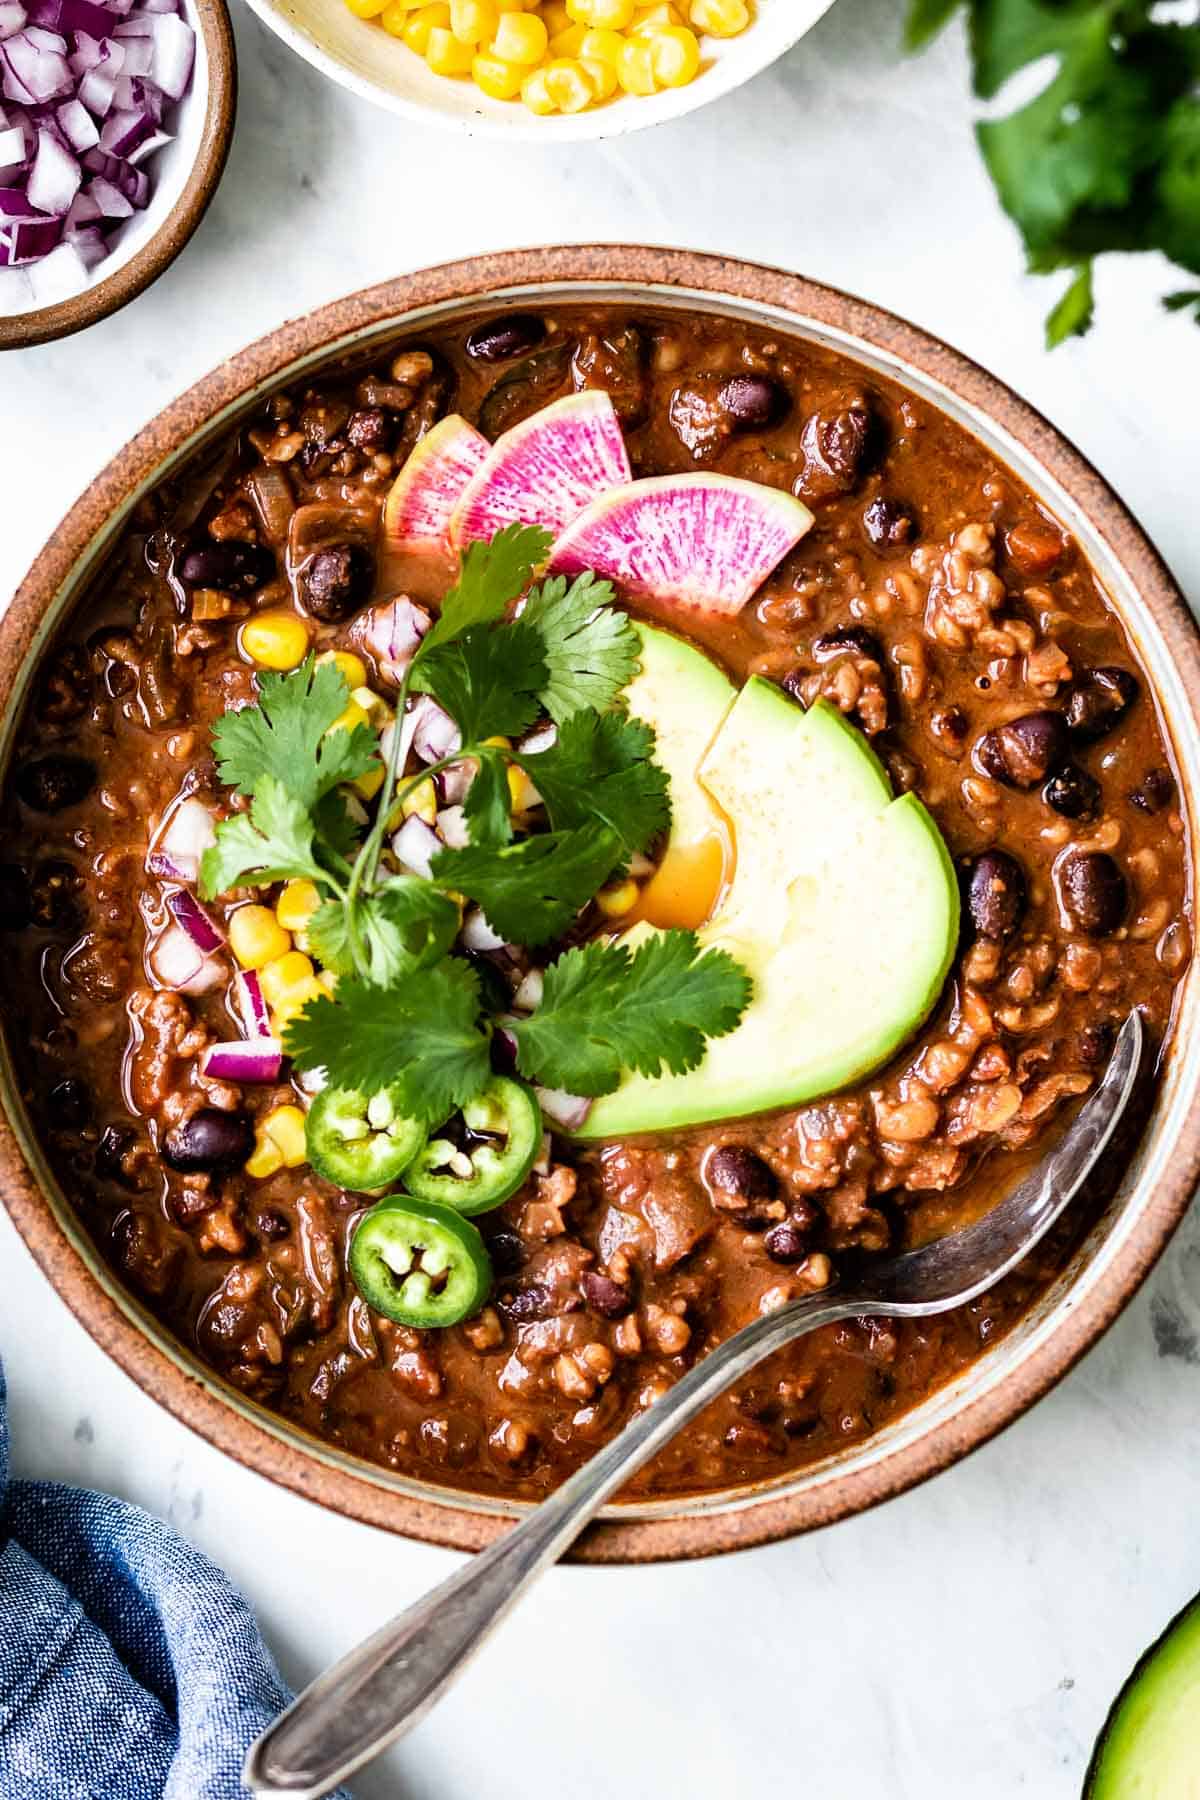 Vegan chili in a bowl garnished with cilantro and avocado slices